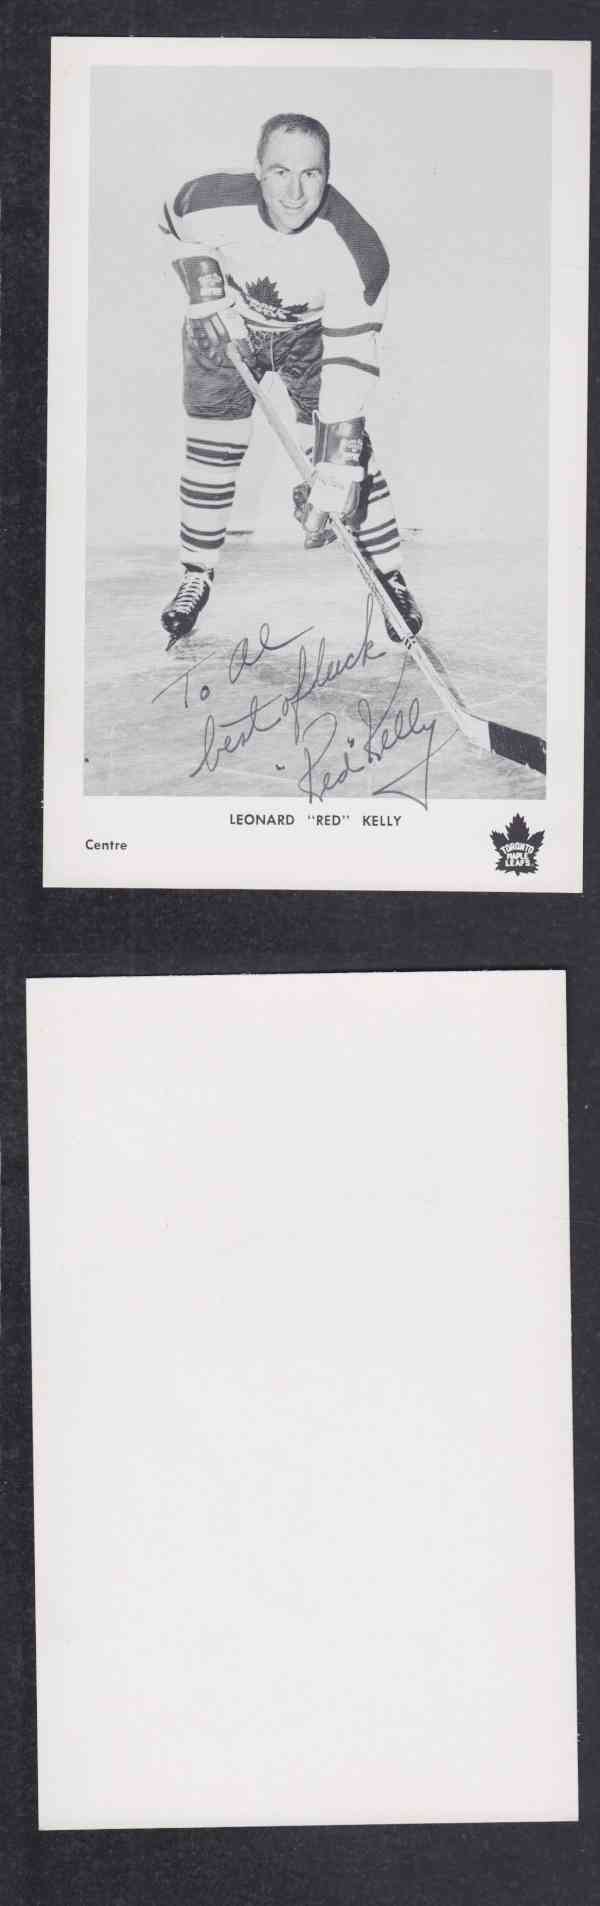 1960 'S TORONTO MAPLE LEAFS R.KELLY  AUTOGRAPHED POST CARD photo